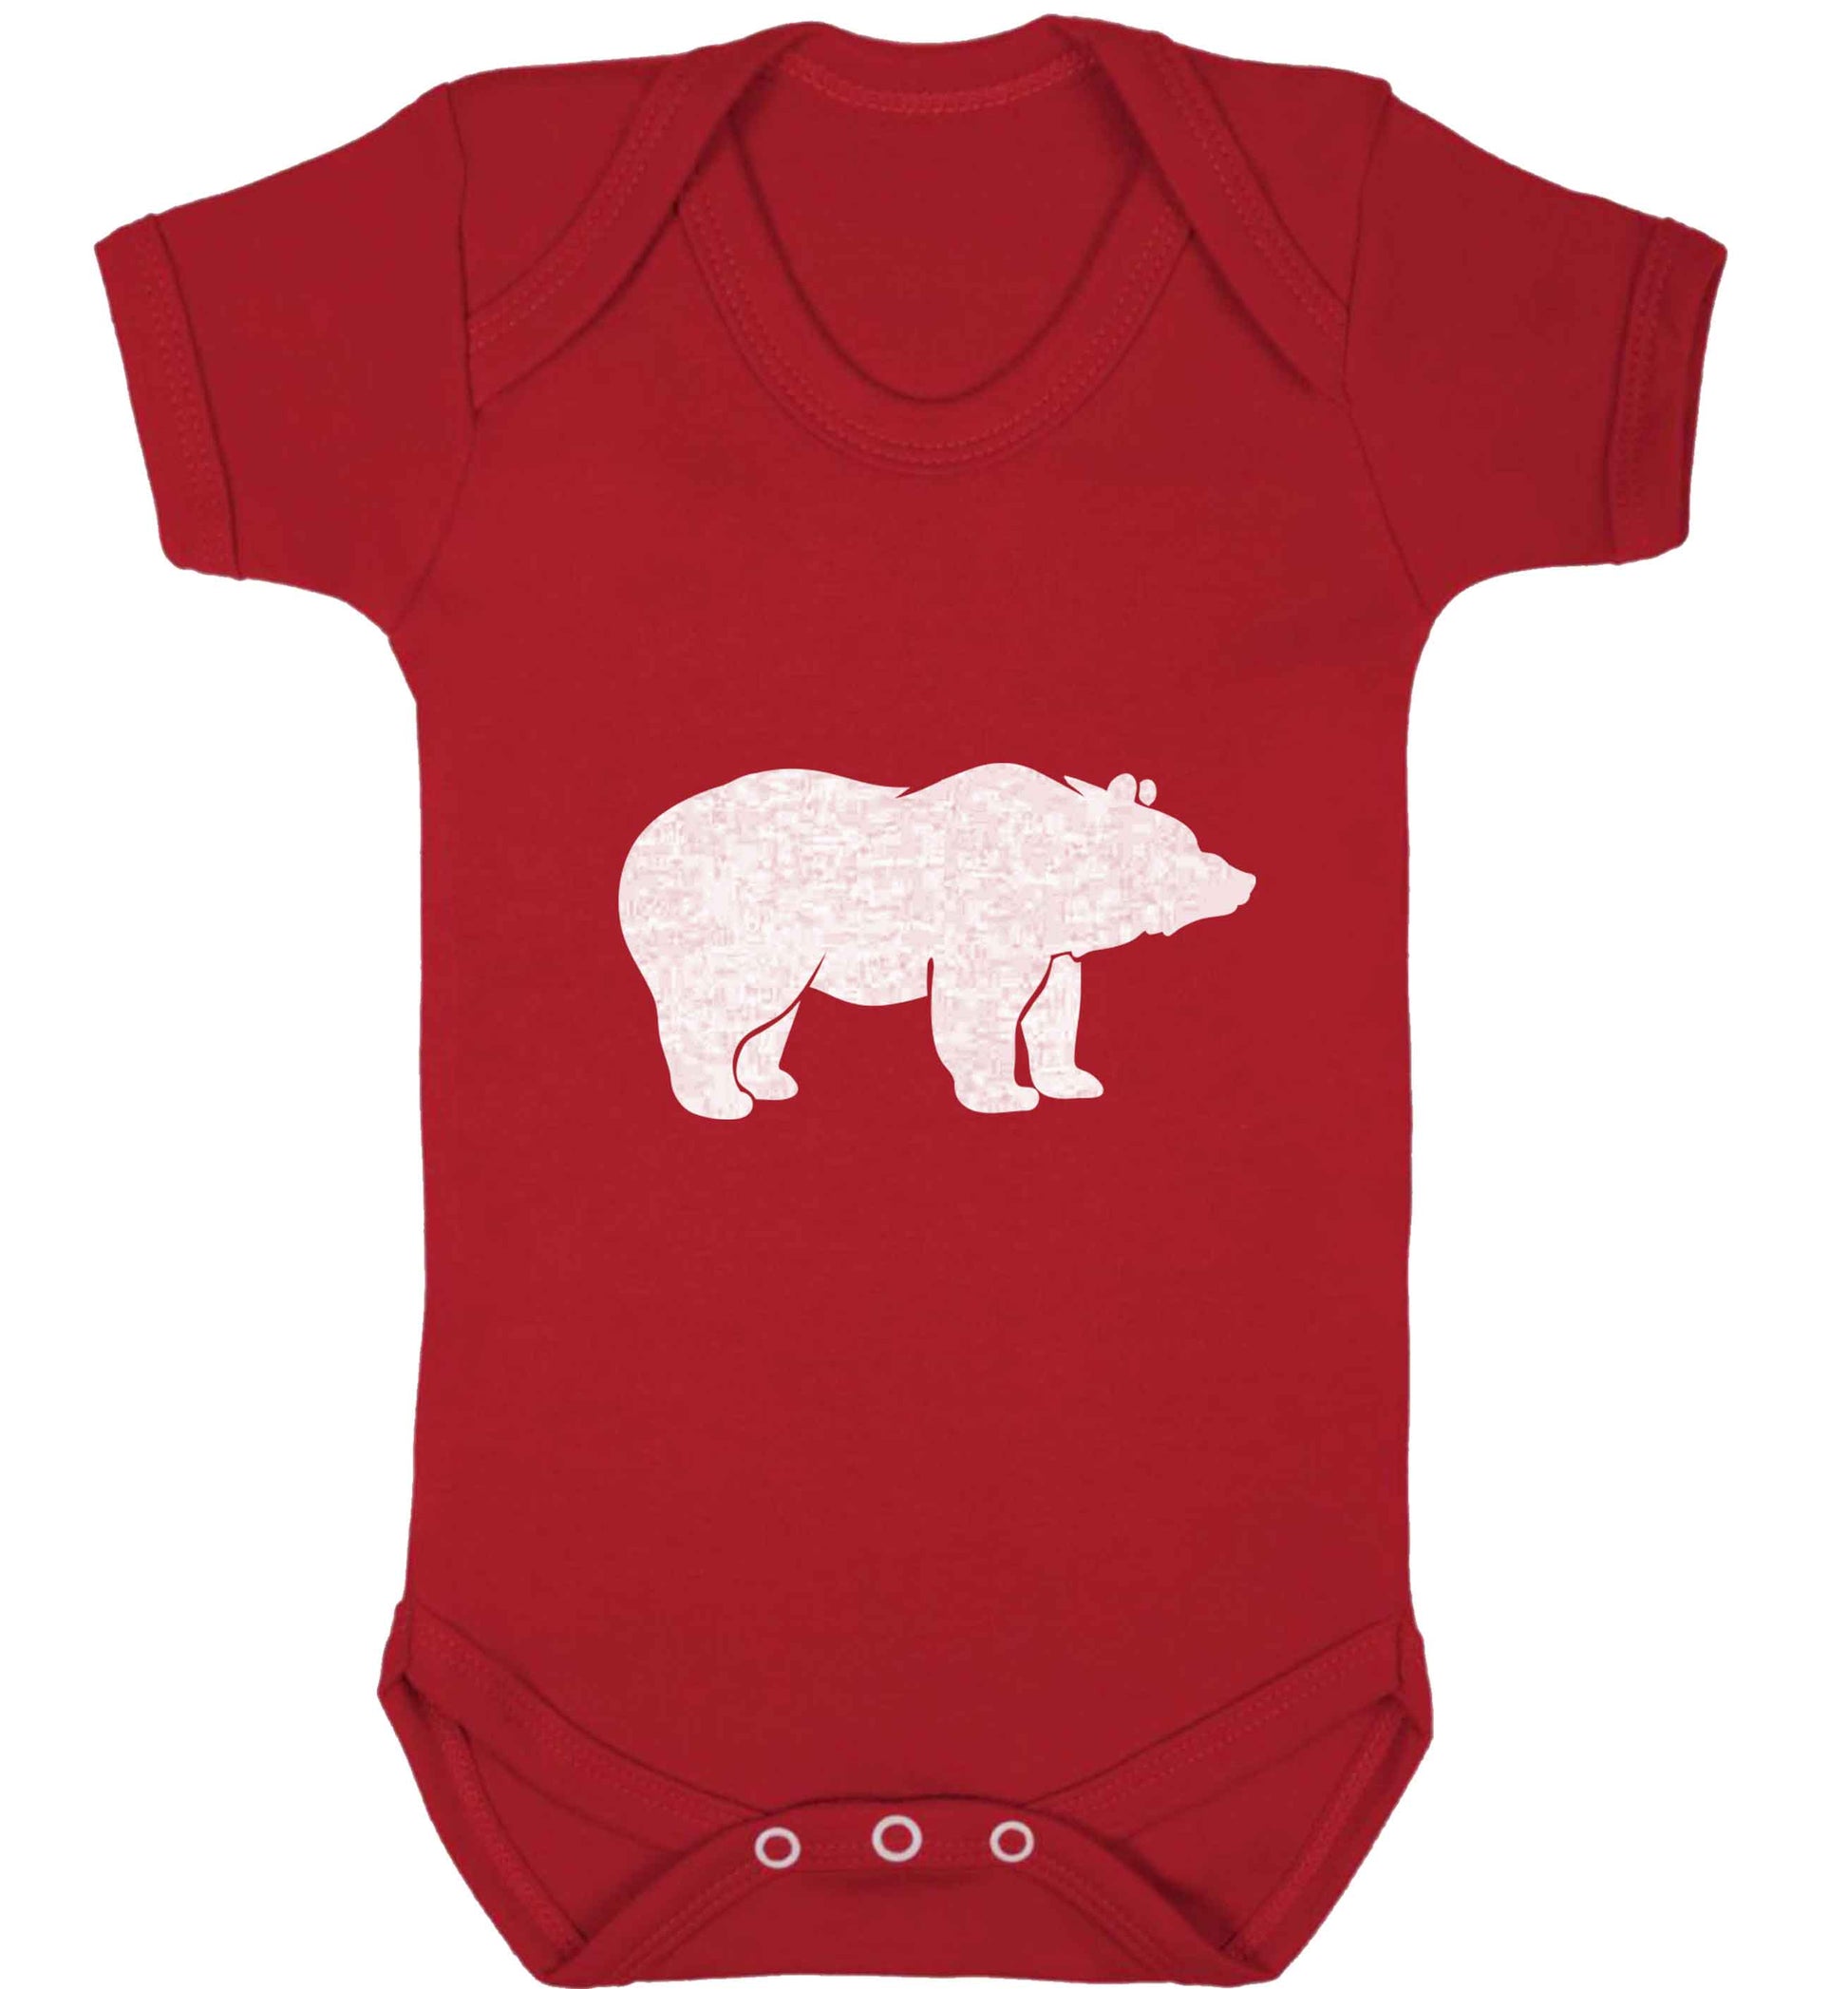 Blue bear baby vest red 18-24 months